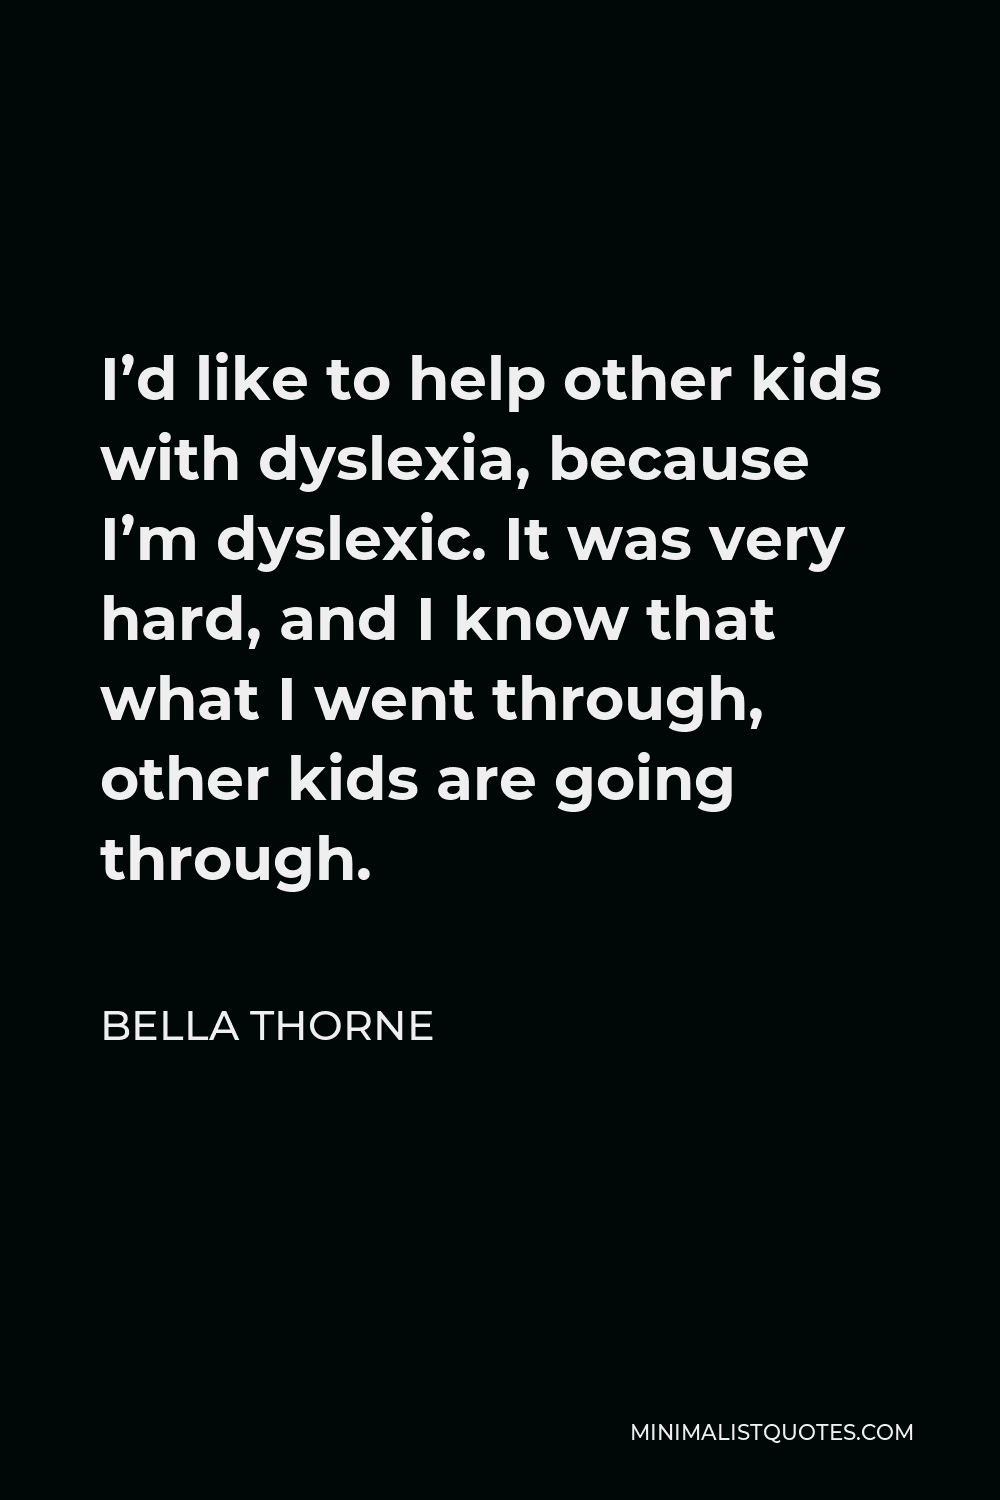 Bella Thorne Quote - I’d like to help other kids with dyslexia, because I’m dyslexic. It was very hard, and I know that what I went through, other kids are going through.